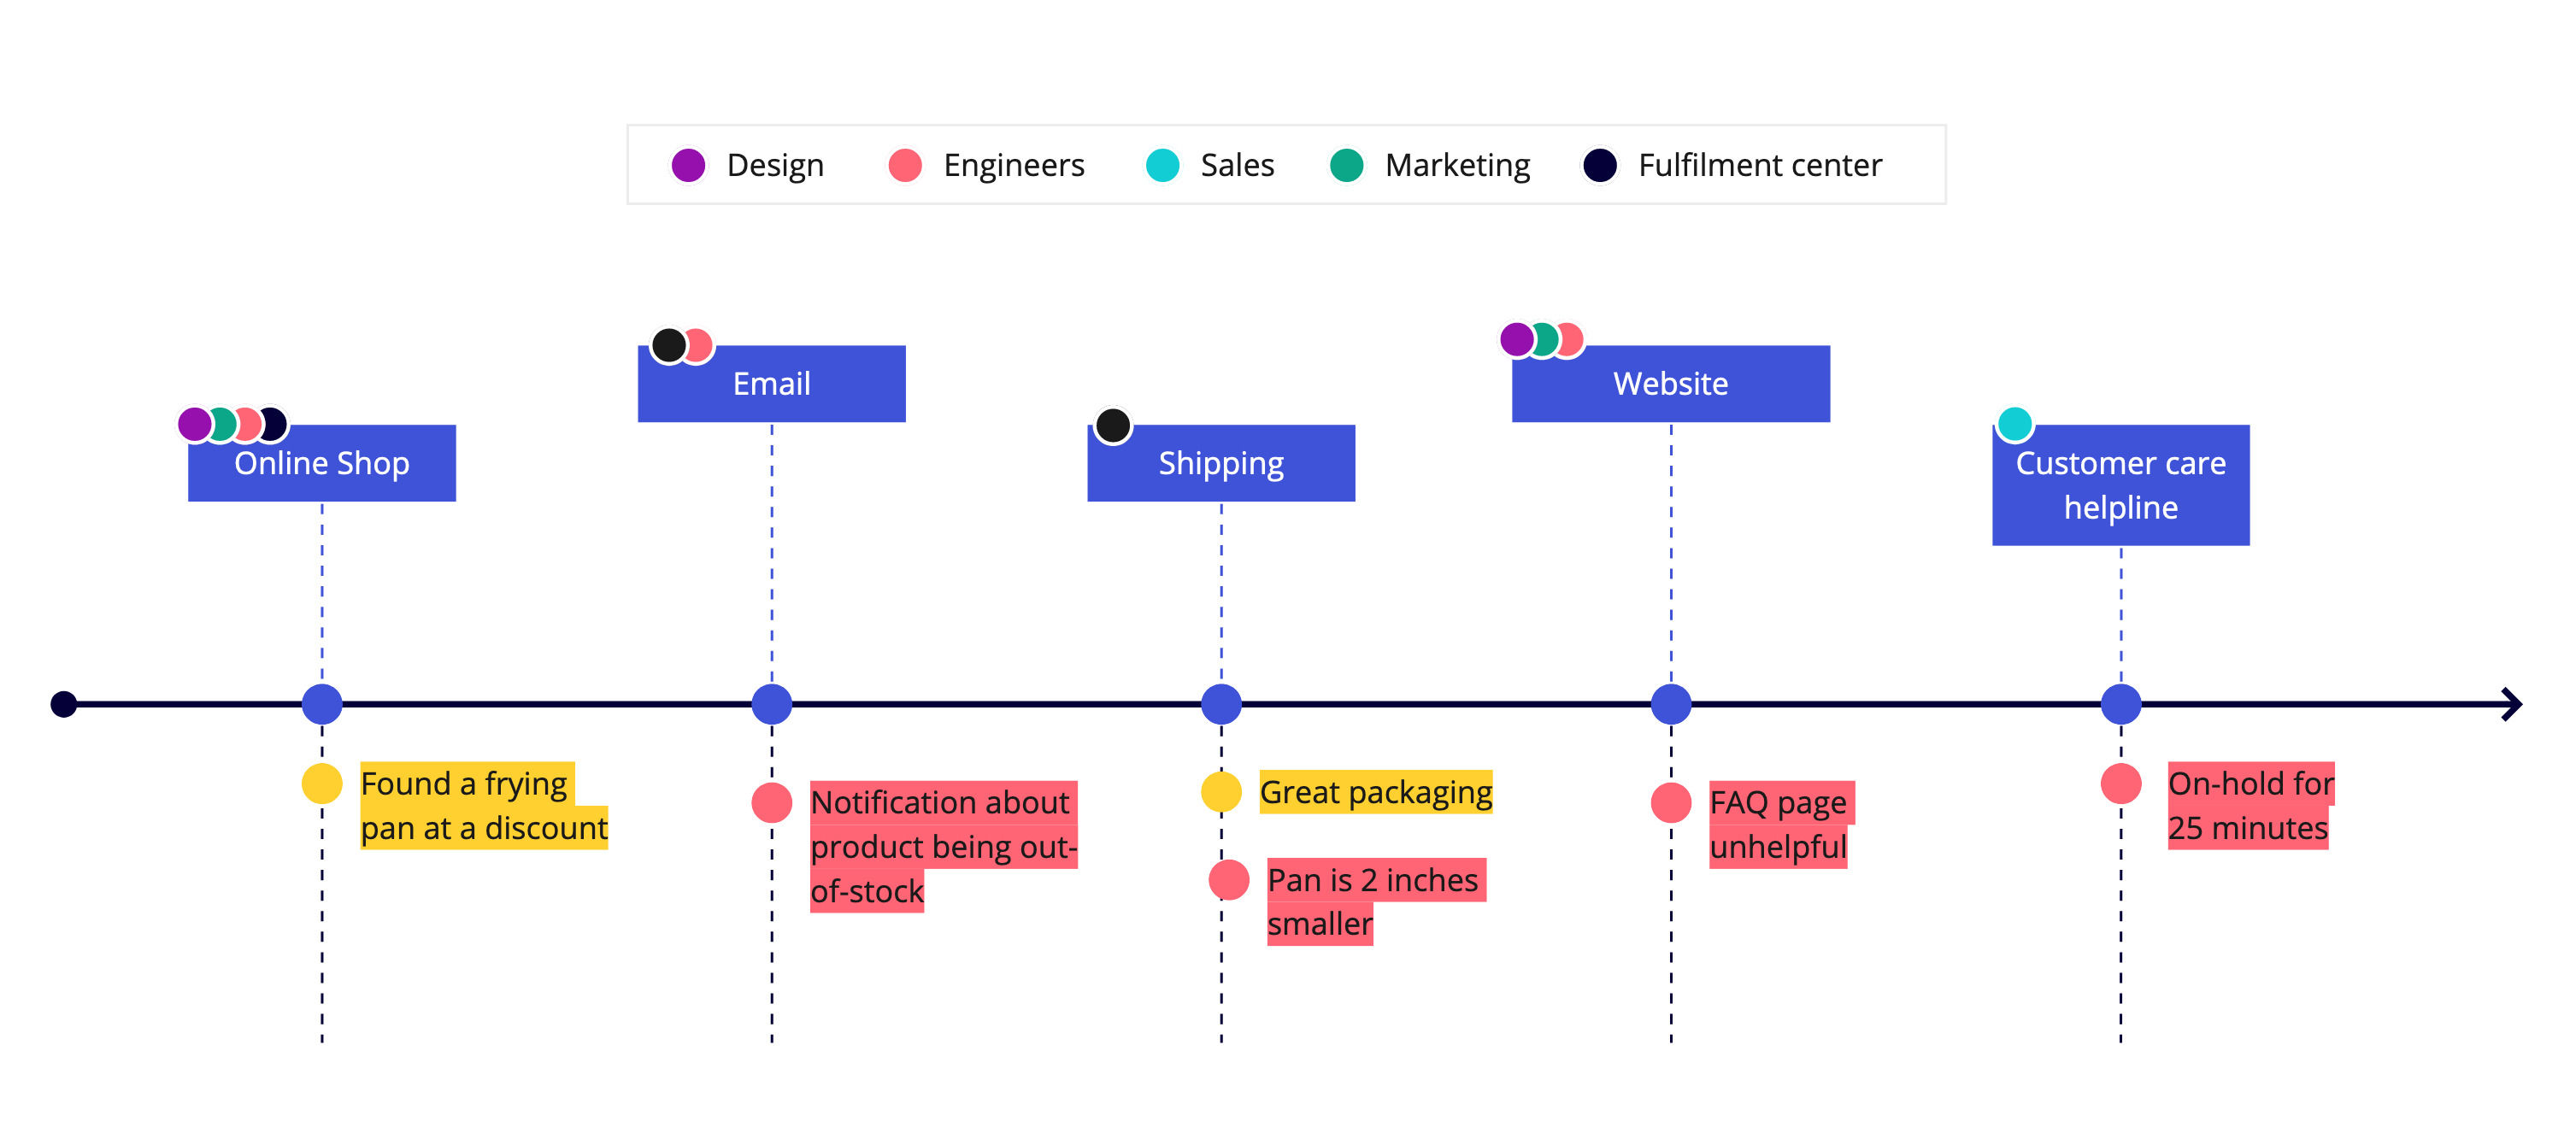 A simple customer journey map indicating different touchpoints, teams or departments responsible for them, and customer experiences at those touchpoints.